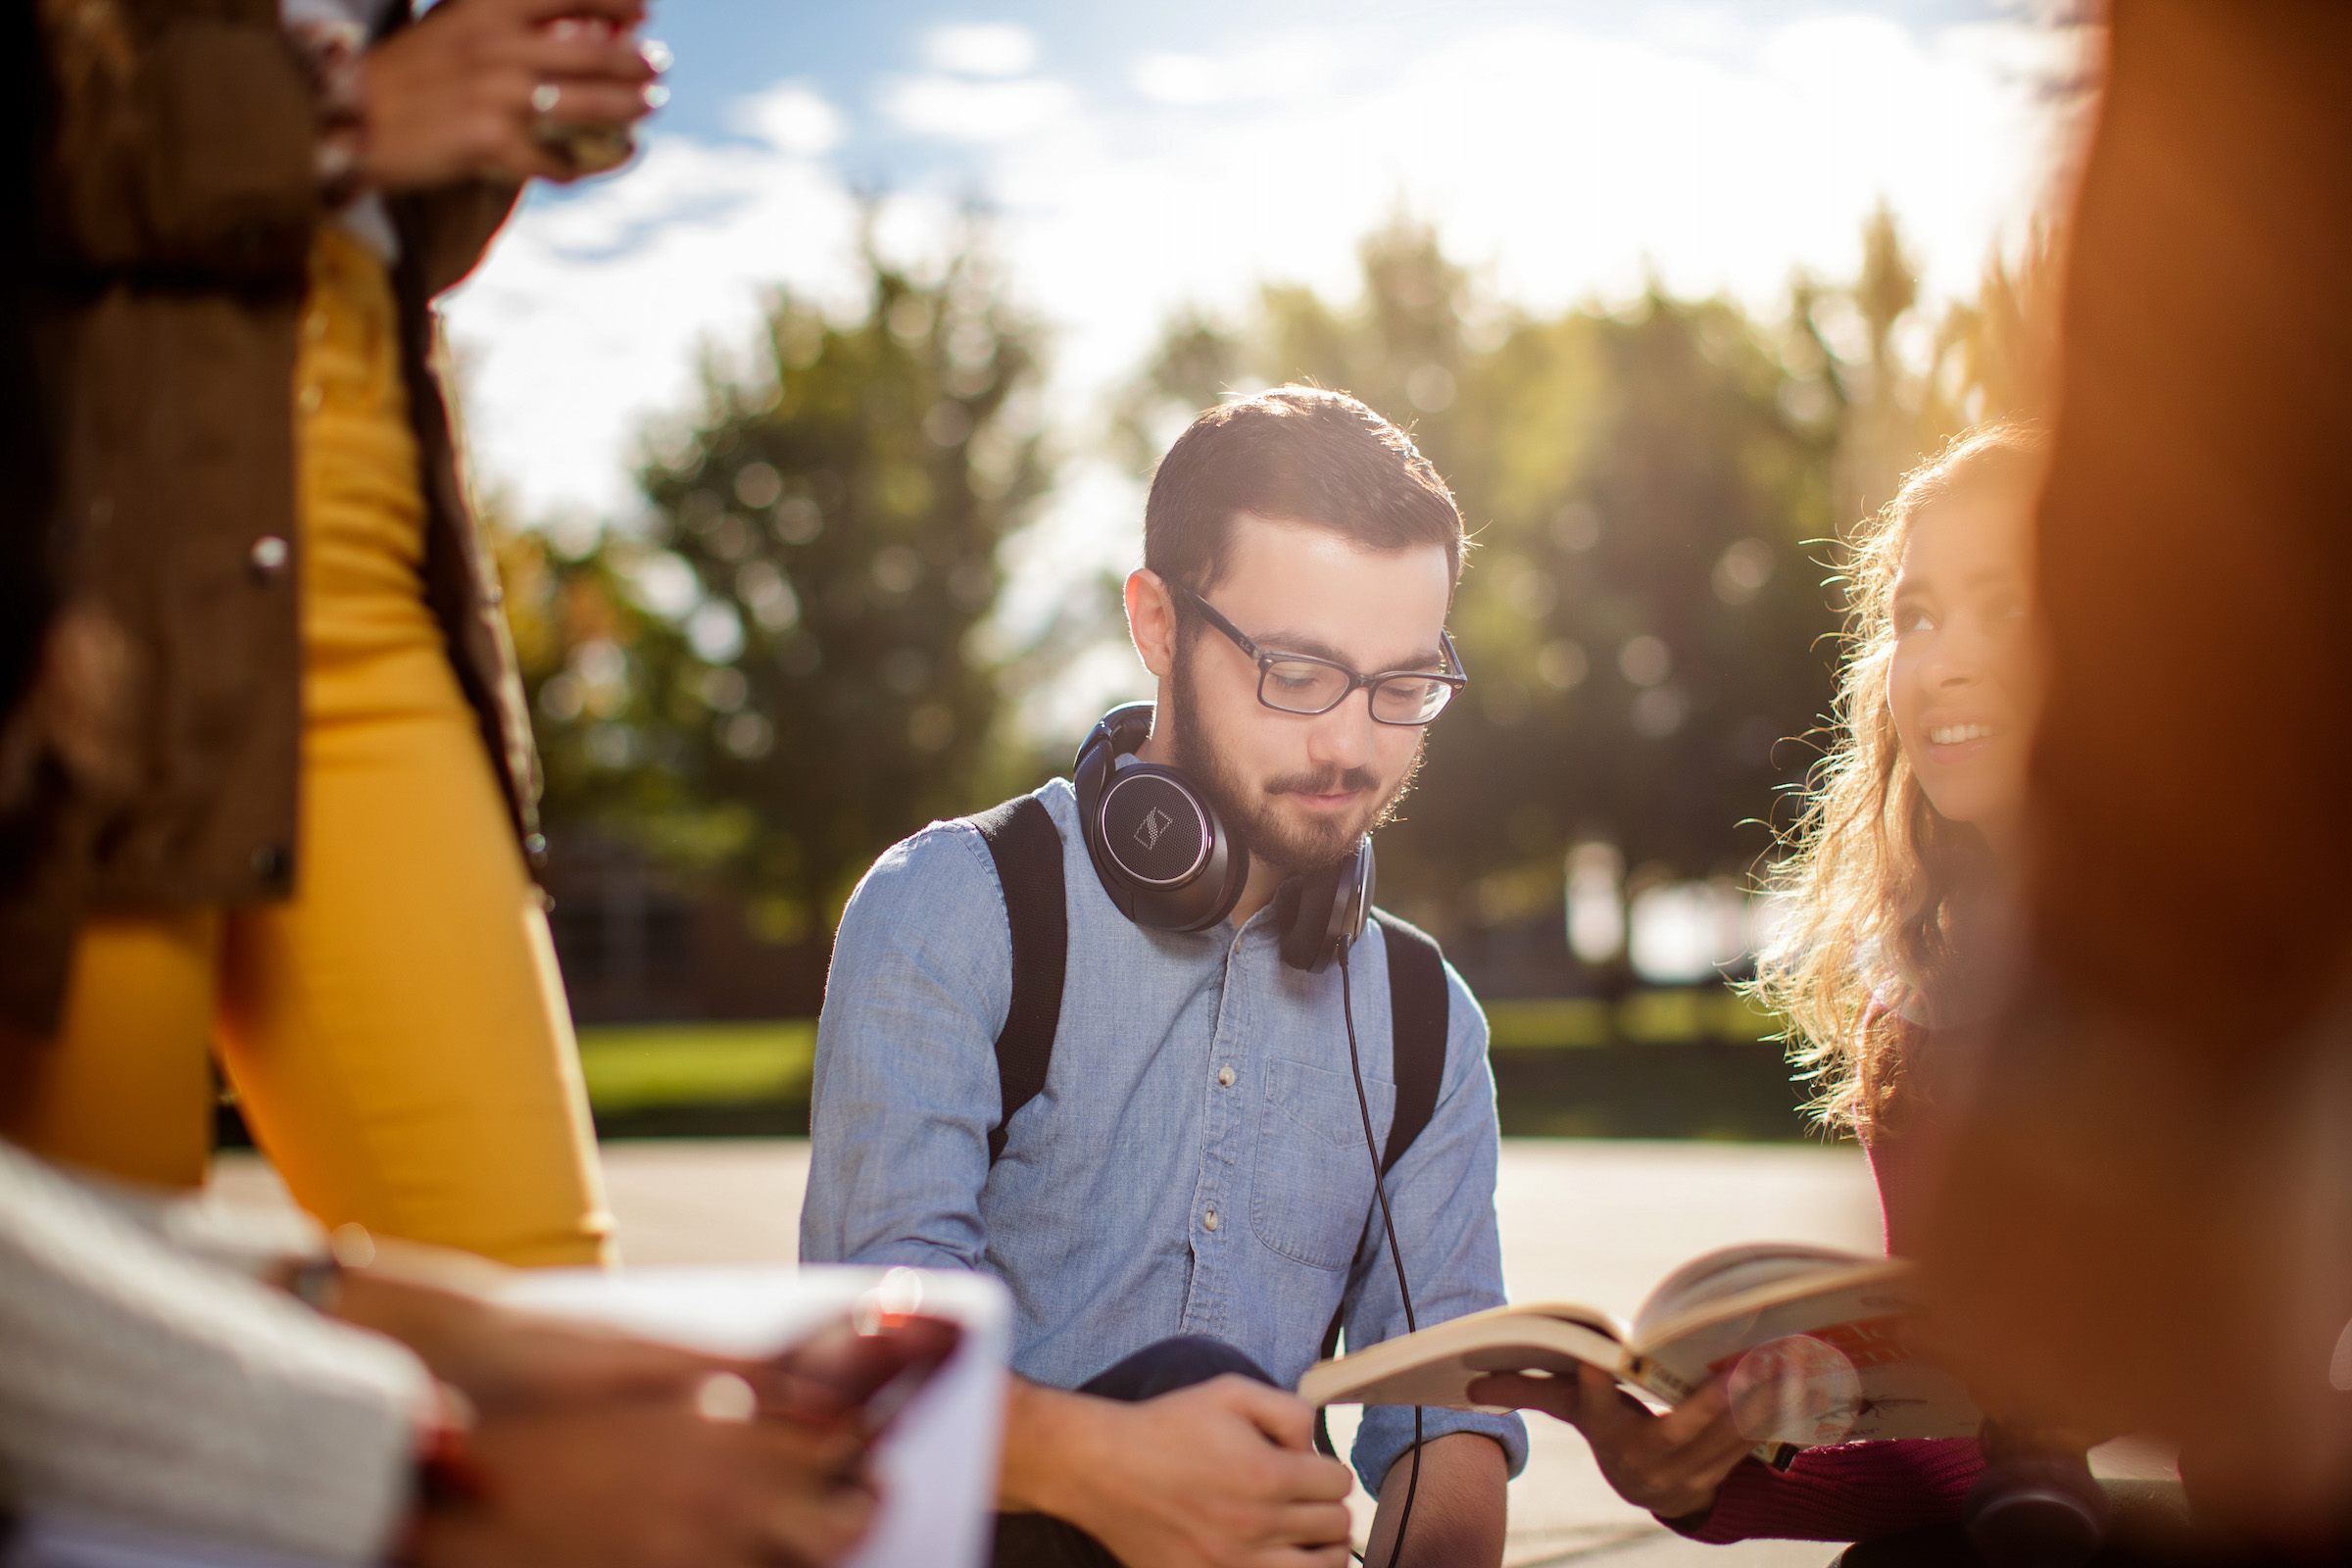 Photo caption: Mitchell Newhouse studies with friends on the Concordia University Wisconsin campus. The image is one of many scenes captured as part of Concordia’s new brand launch.